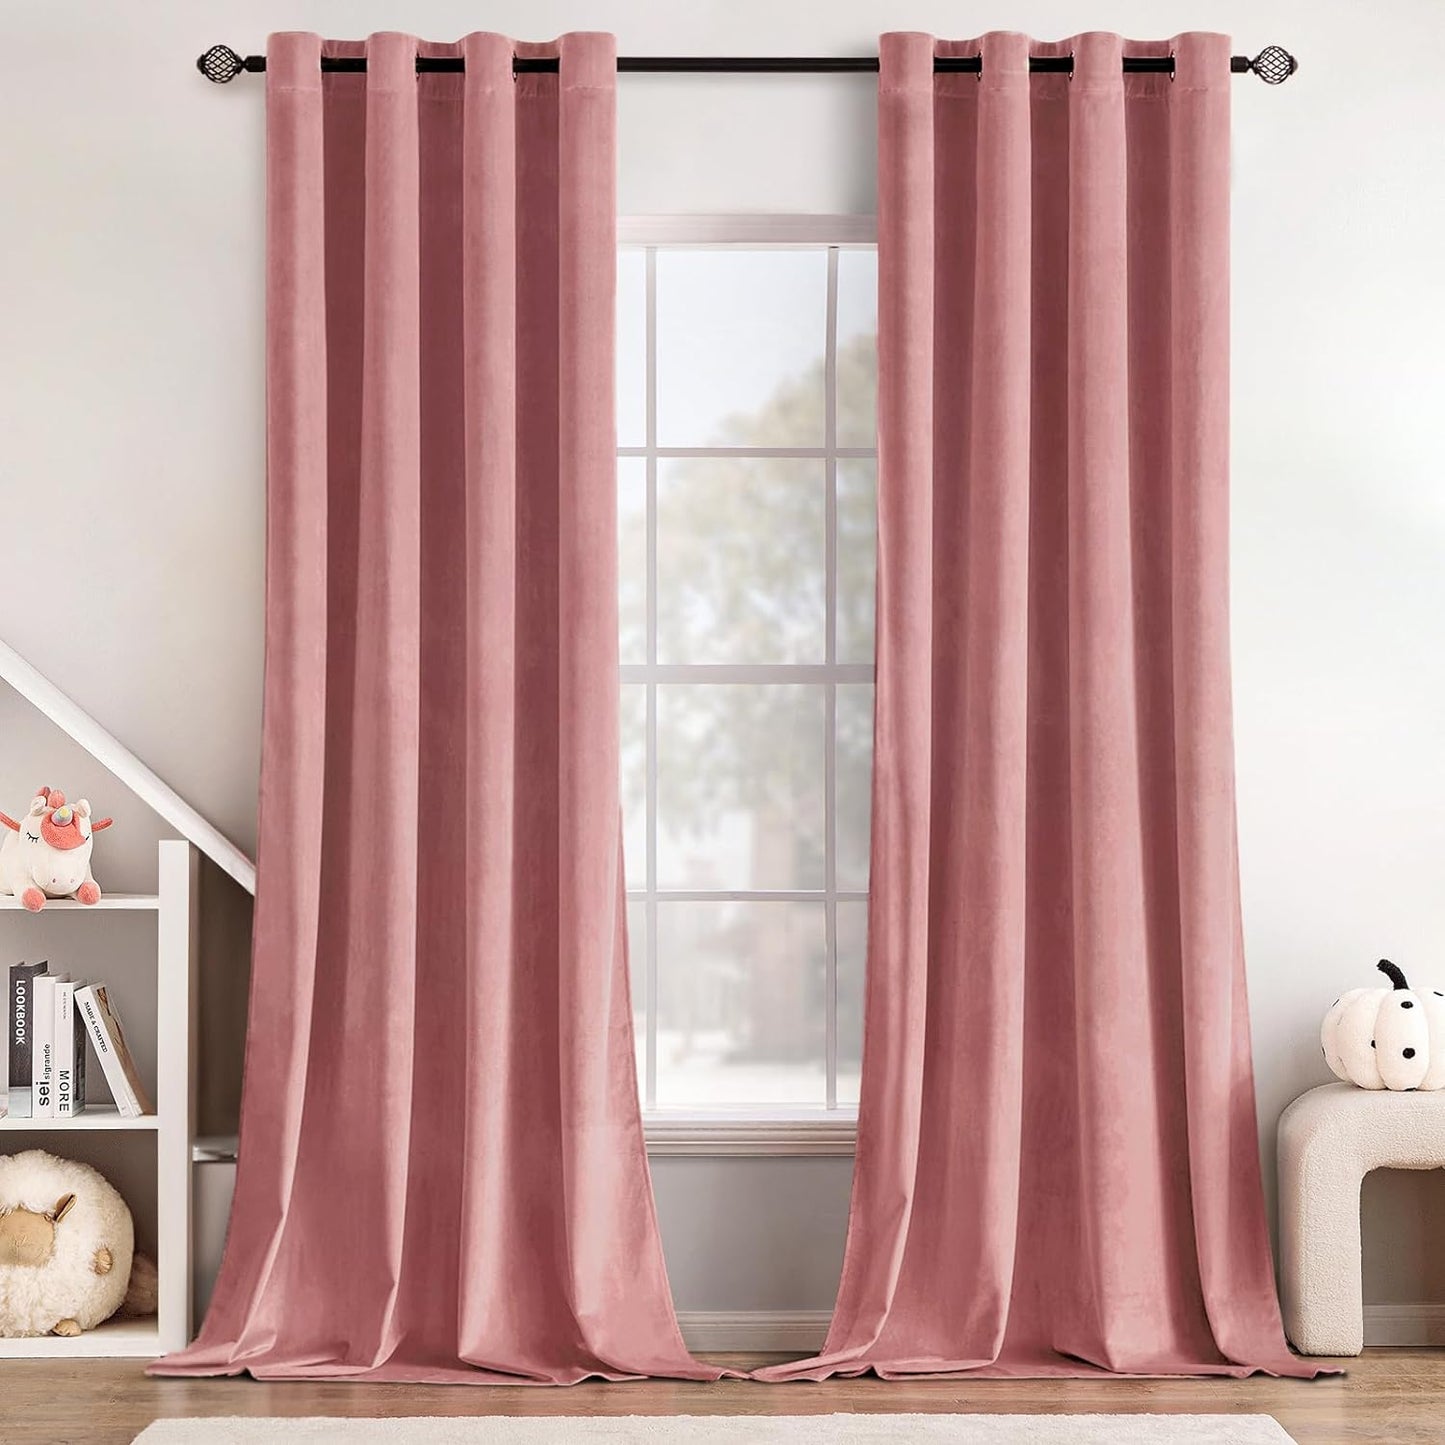 MIULEE Velvet Curtains Olive Green Elegant Grommet Curtains Thermal Insulated Soundproof Room Darkening Curtains/Drapes for Classical Living Room Bedroom Decor 52 X 84 Inch Set of 2  MIULEE Blush Pink W52 X L96 